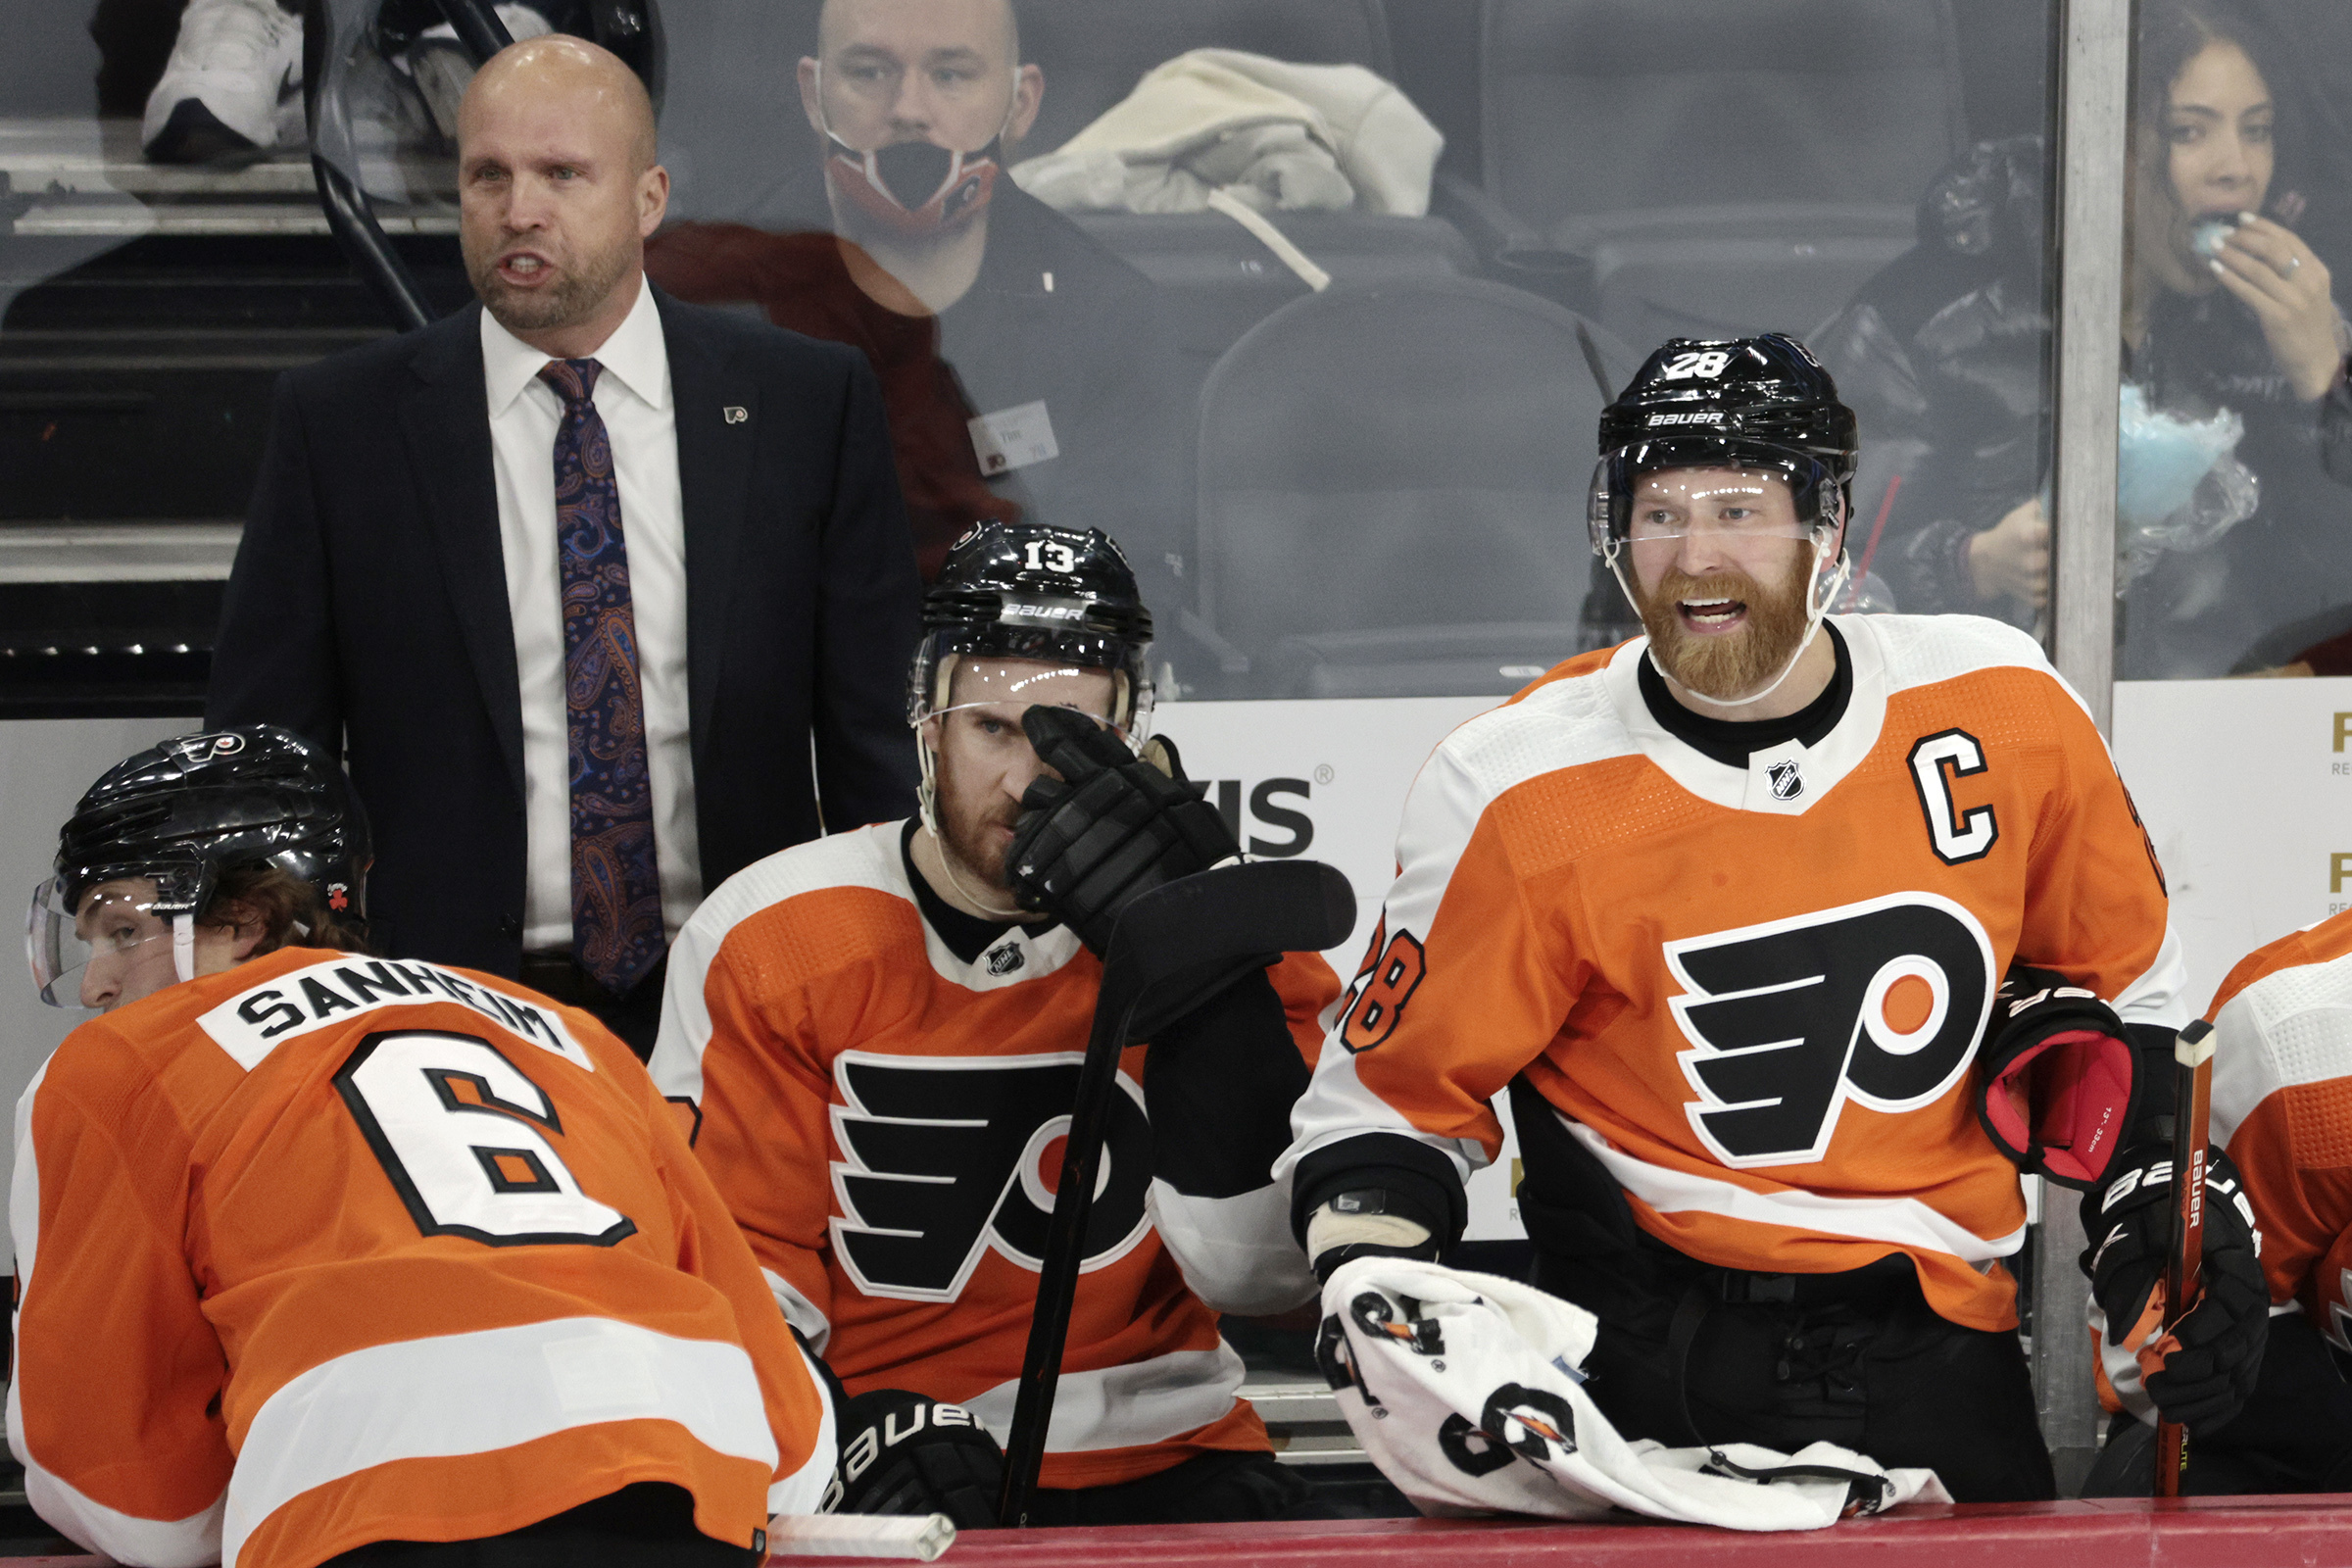 Flyers Notebook: Mike Yeo's challenge yielded strong response